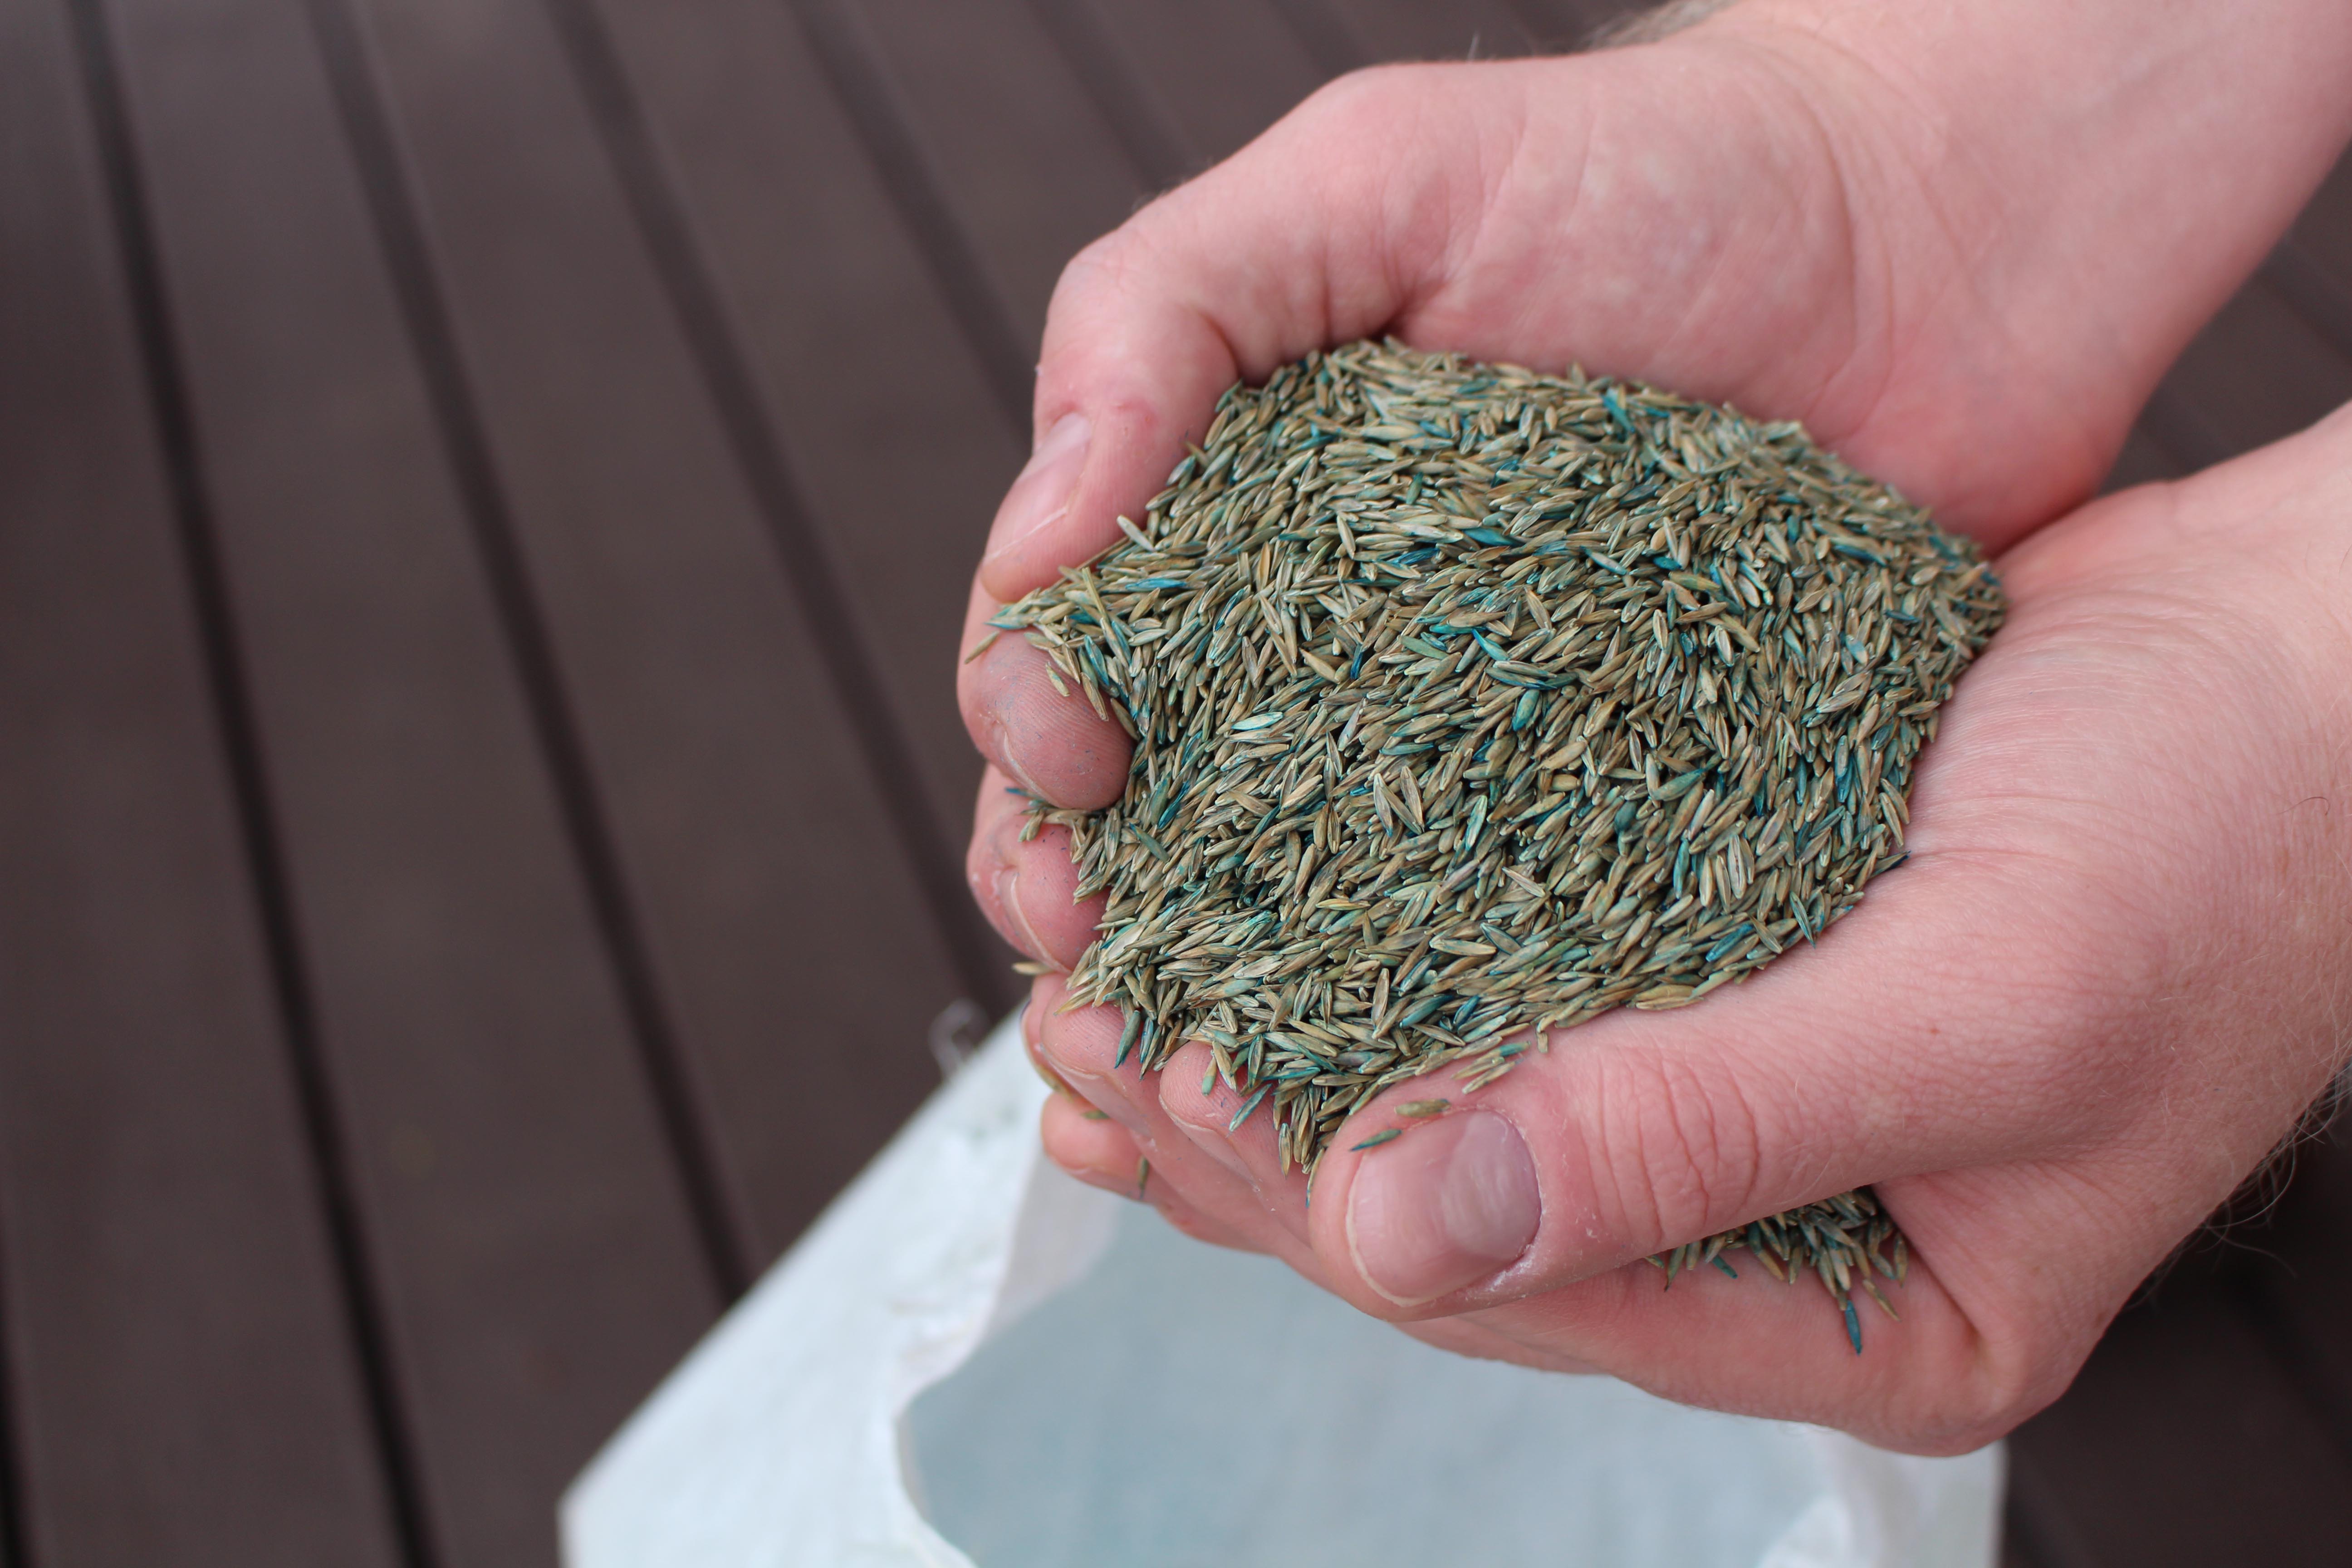 Qualities to Look for when Buying Fescue Seed